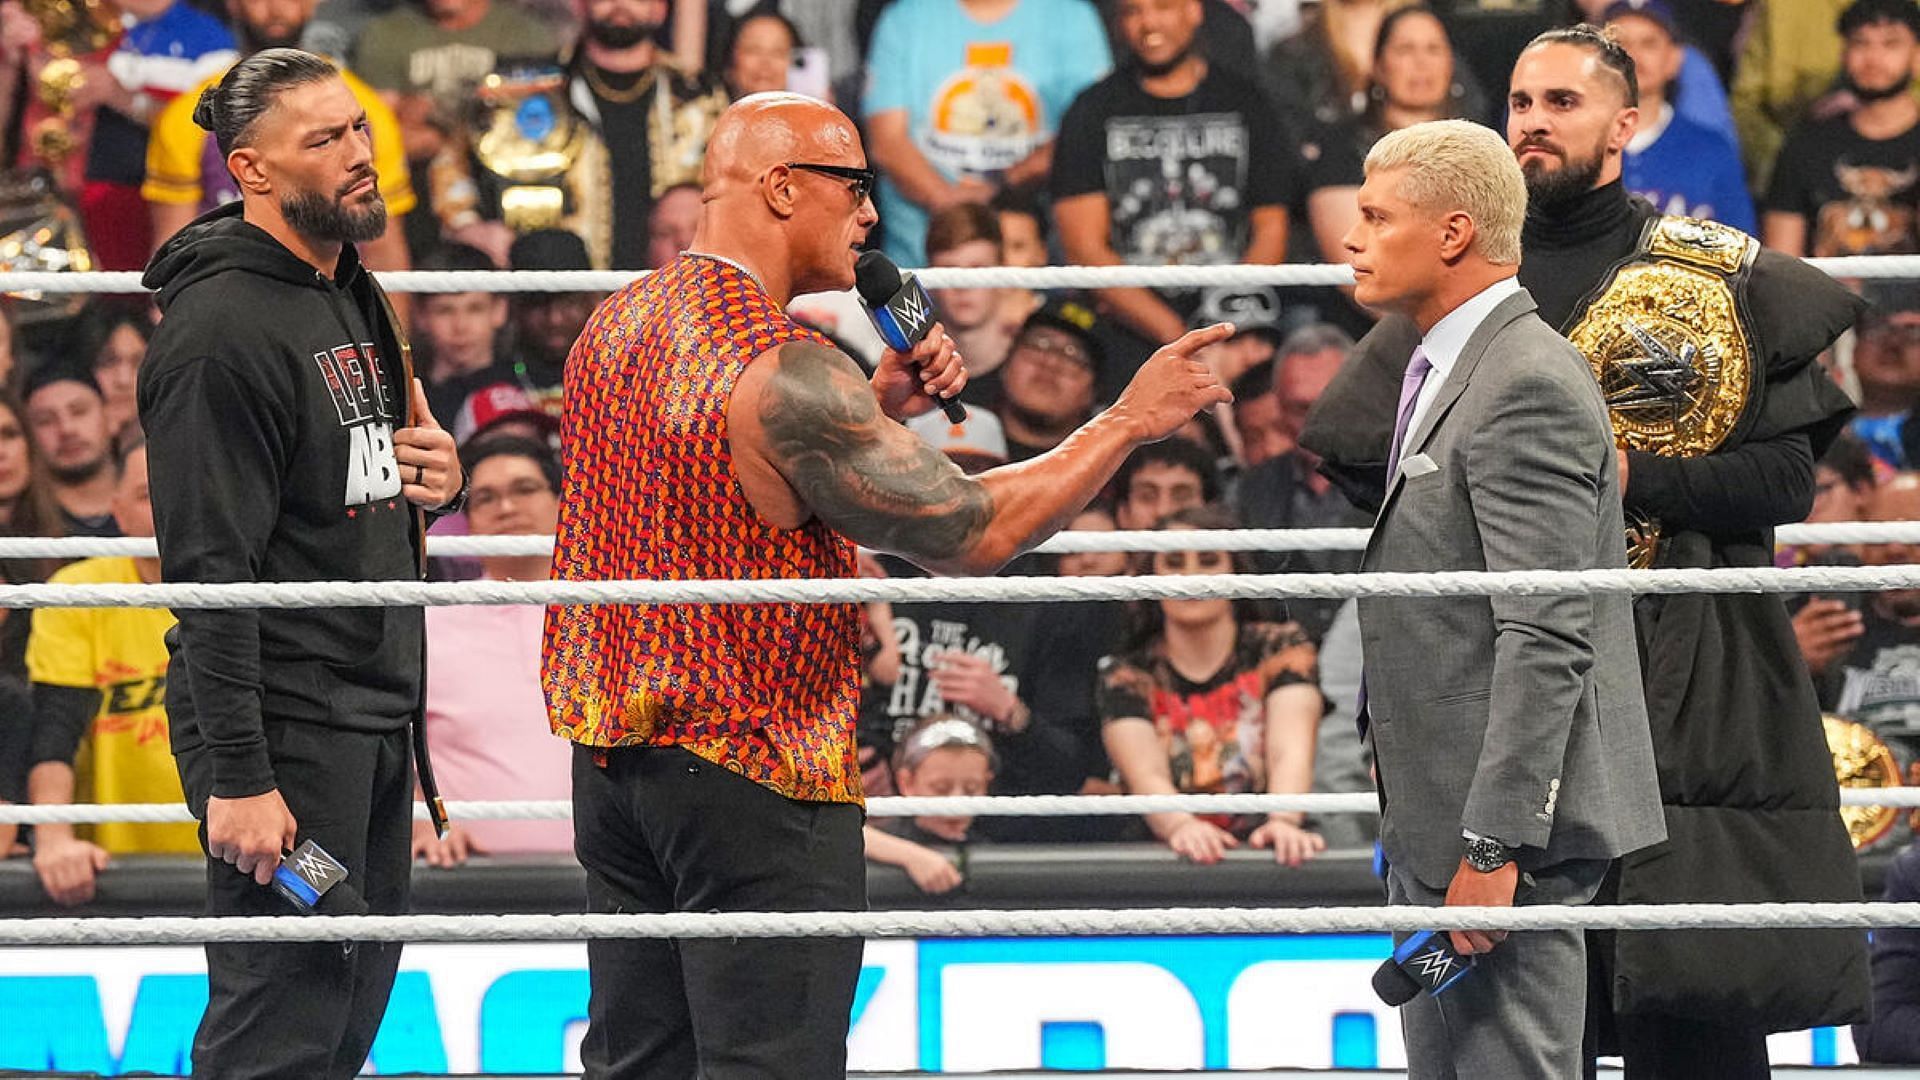 Could an old rival show up to oppose The Rock?